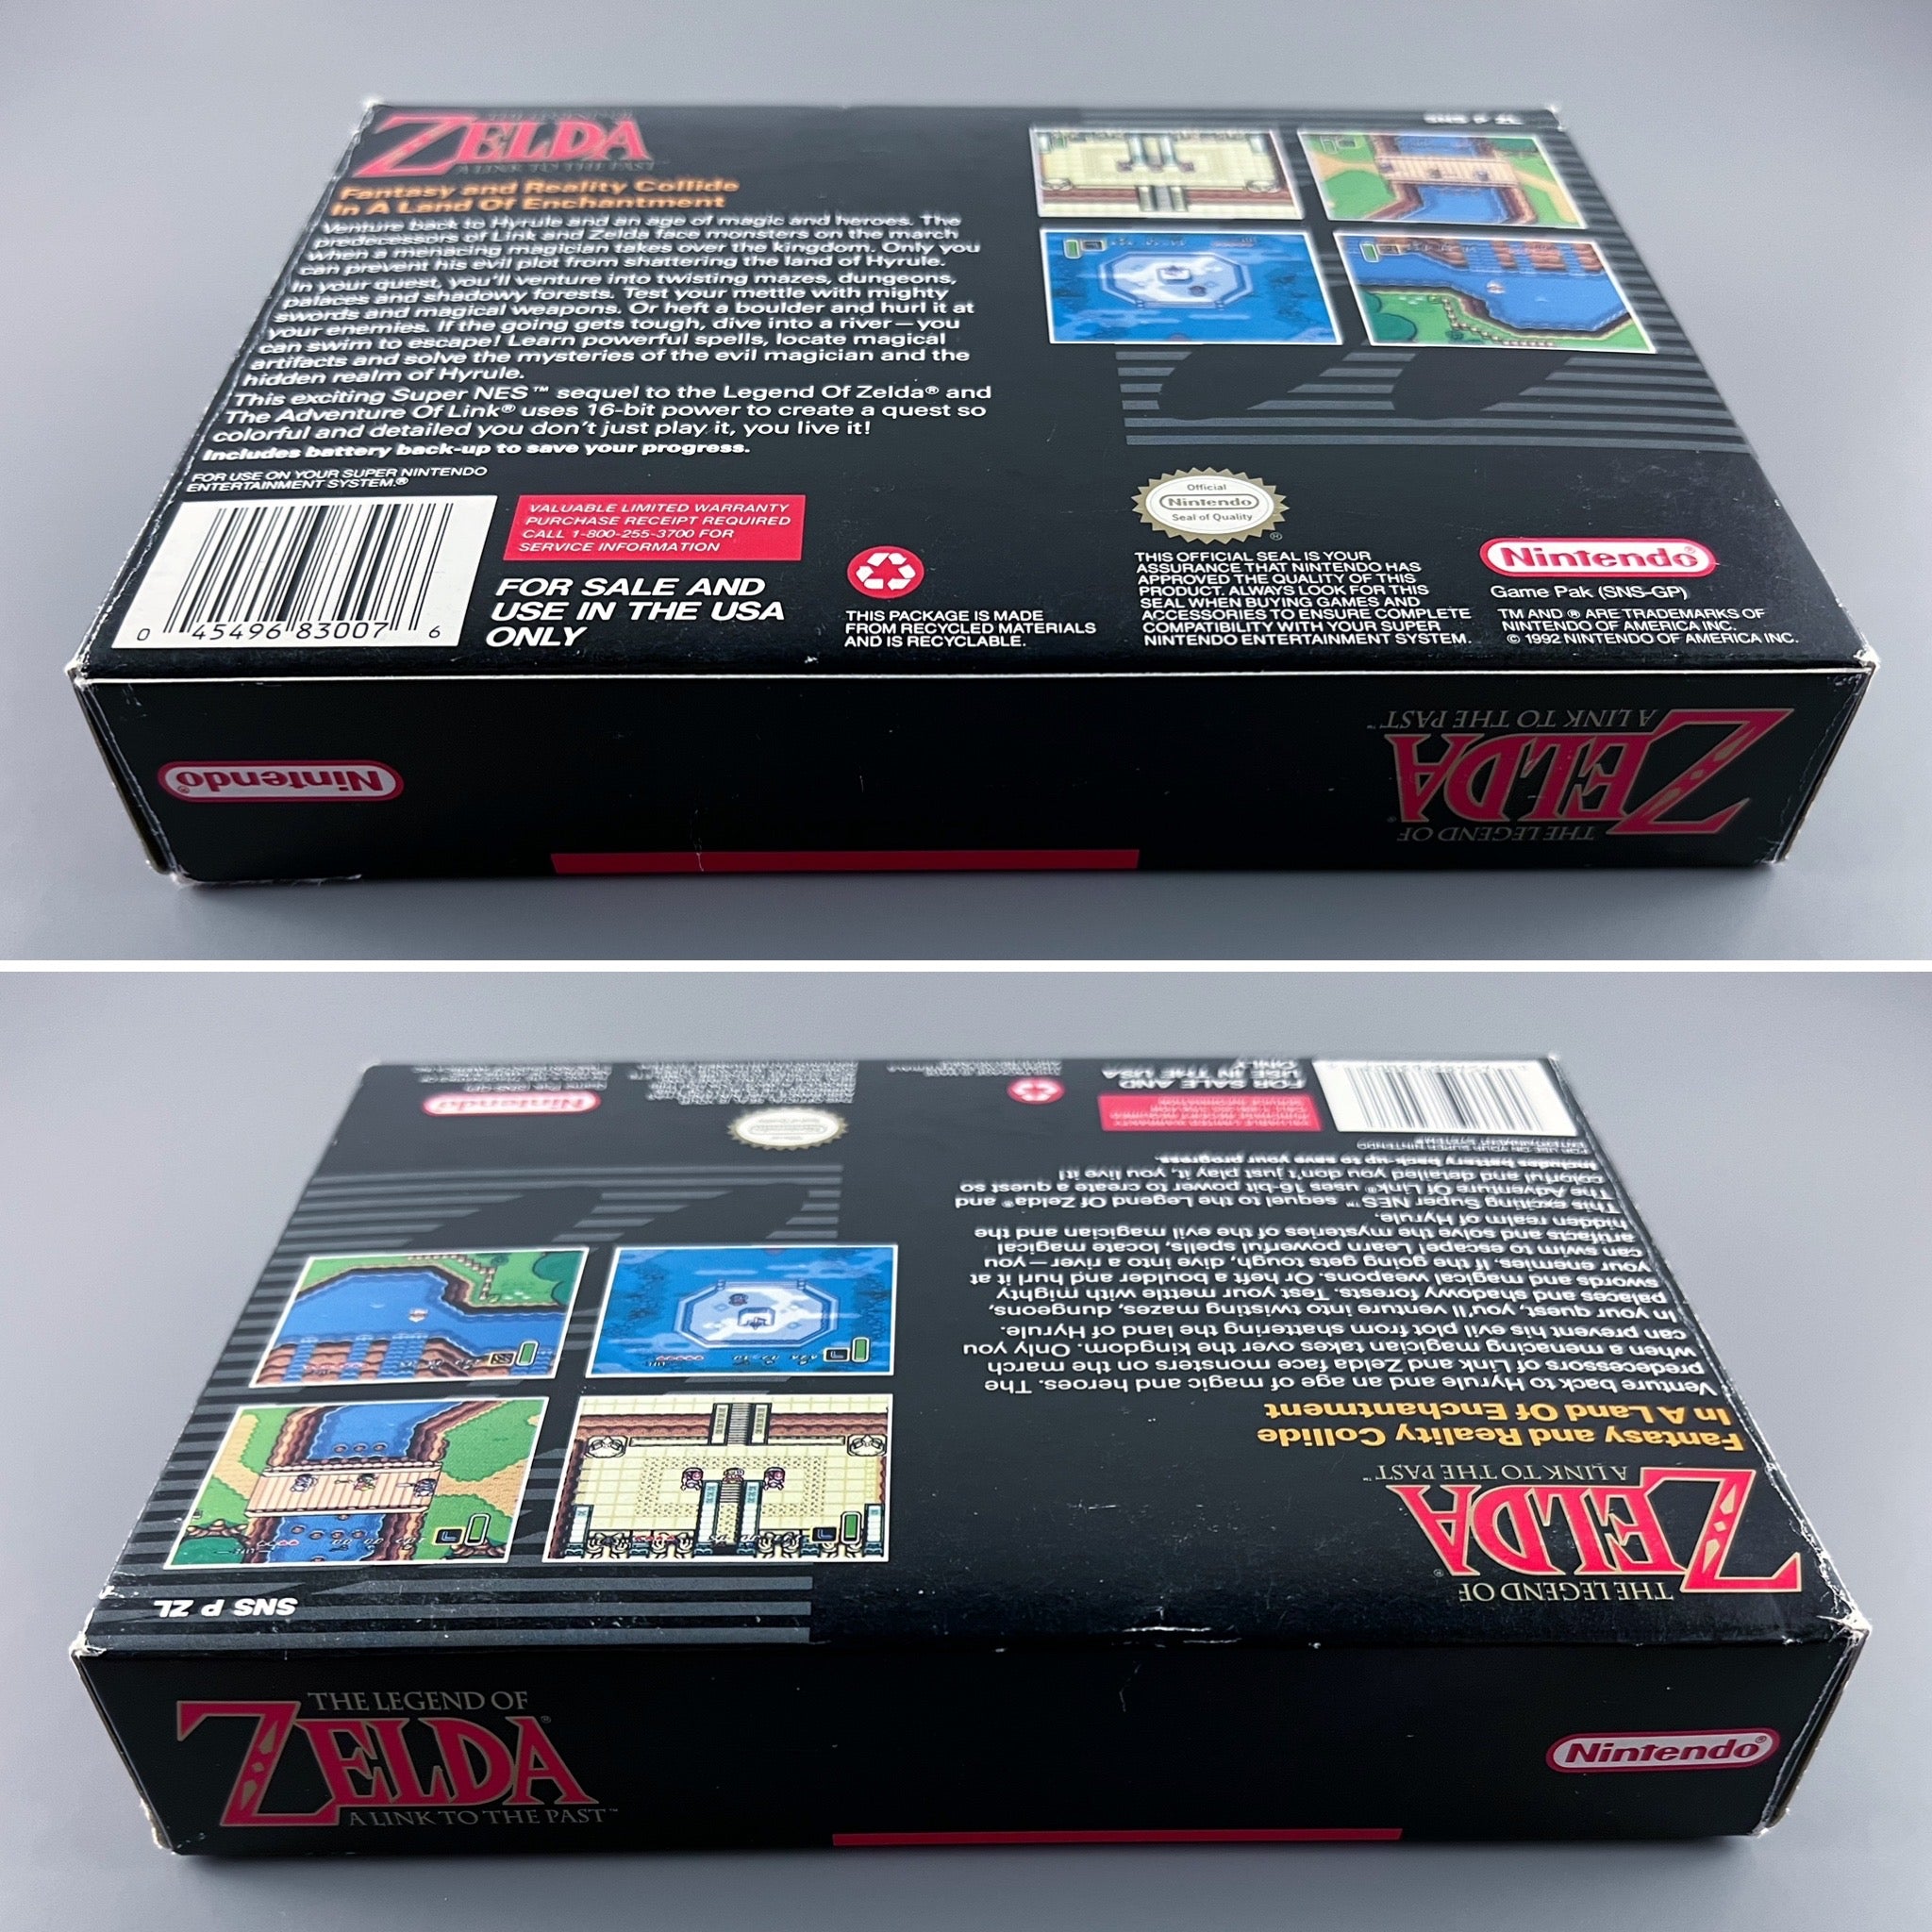 The Legend of Zelda a Link to the Past SNES Game Case No Game